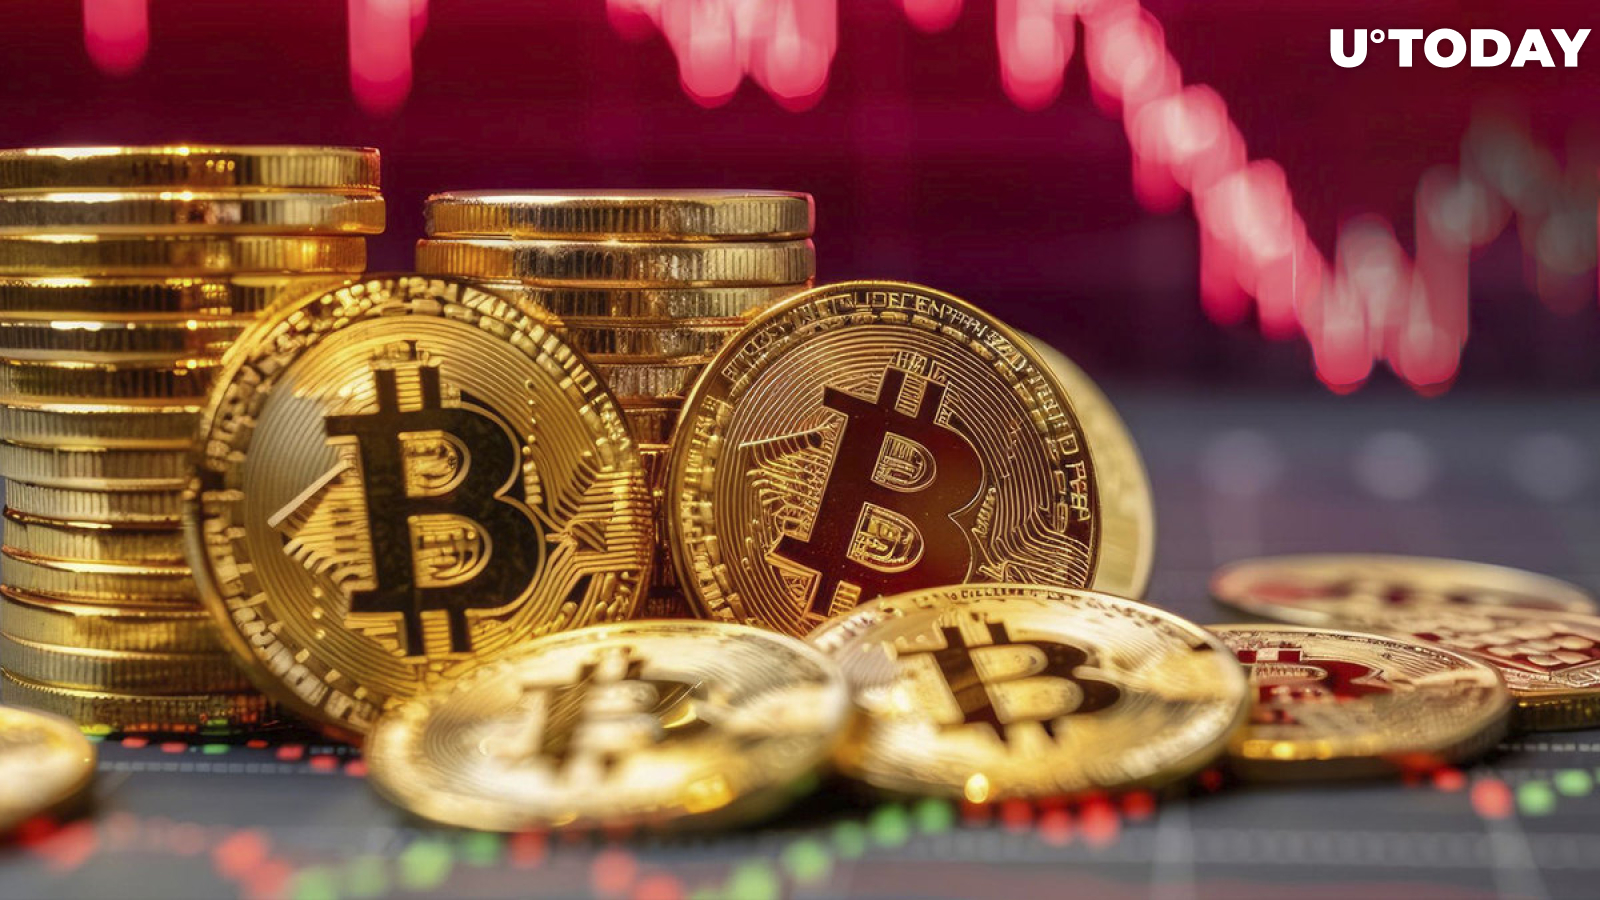 Bitcoin: What Caused $157 Million Price Plunge?